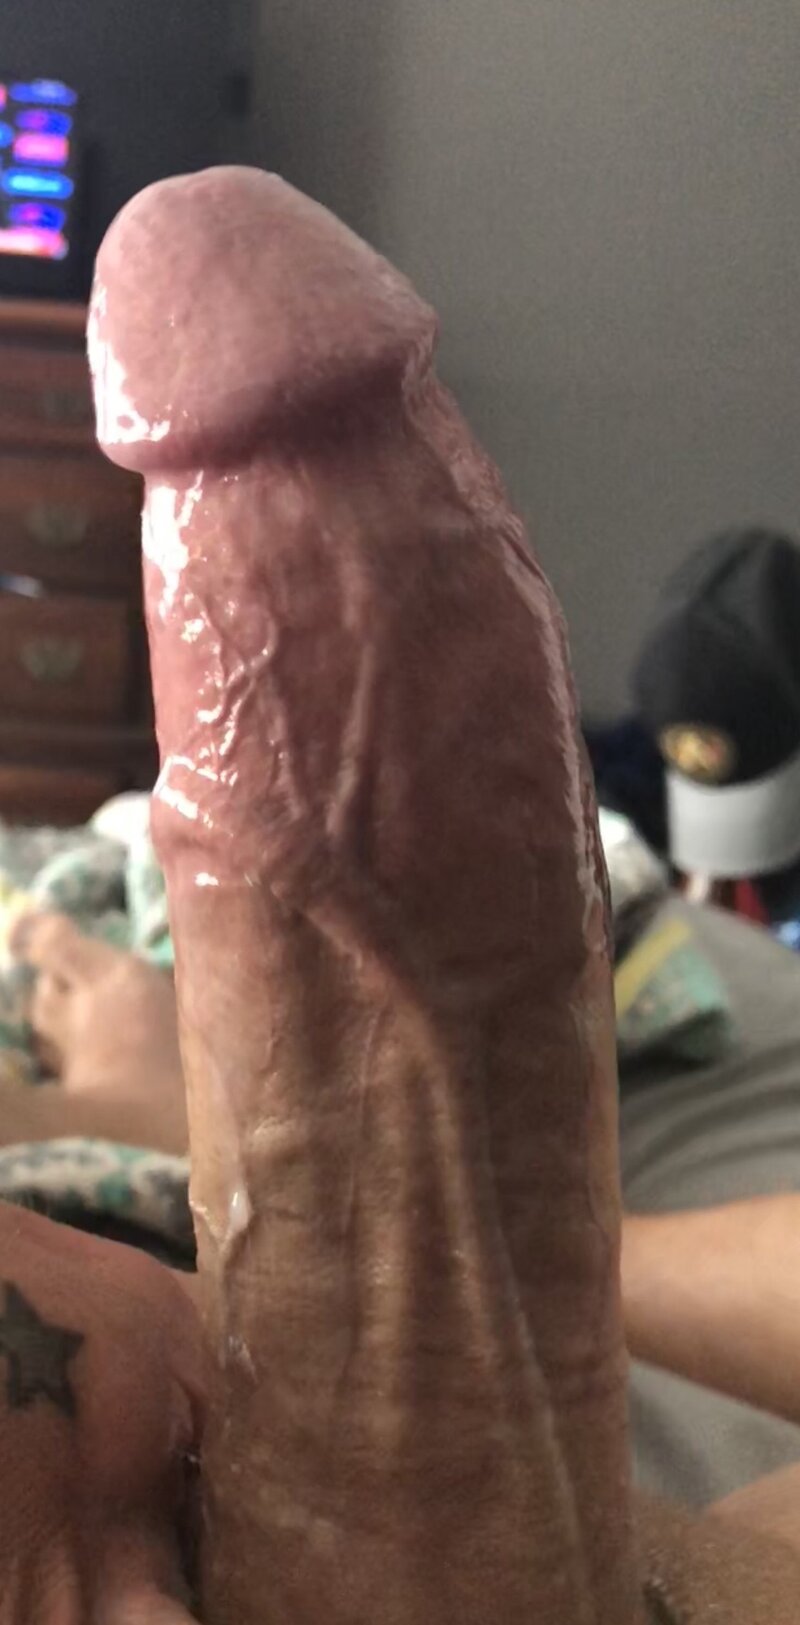 Comment on My Dick ... picture